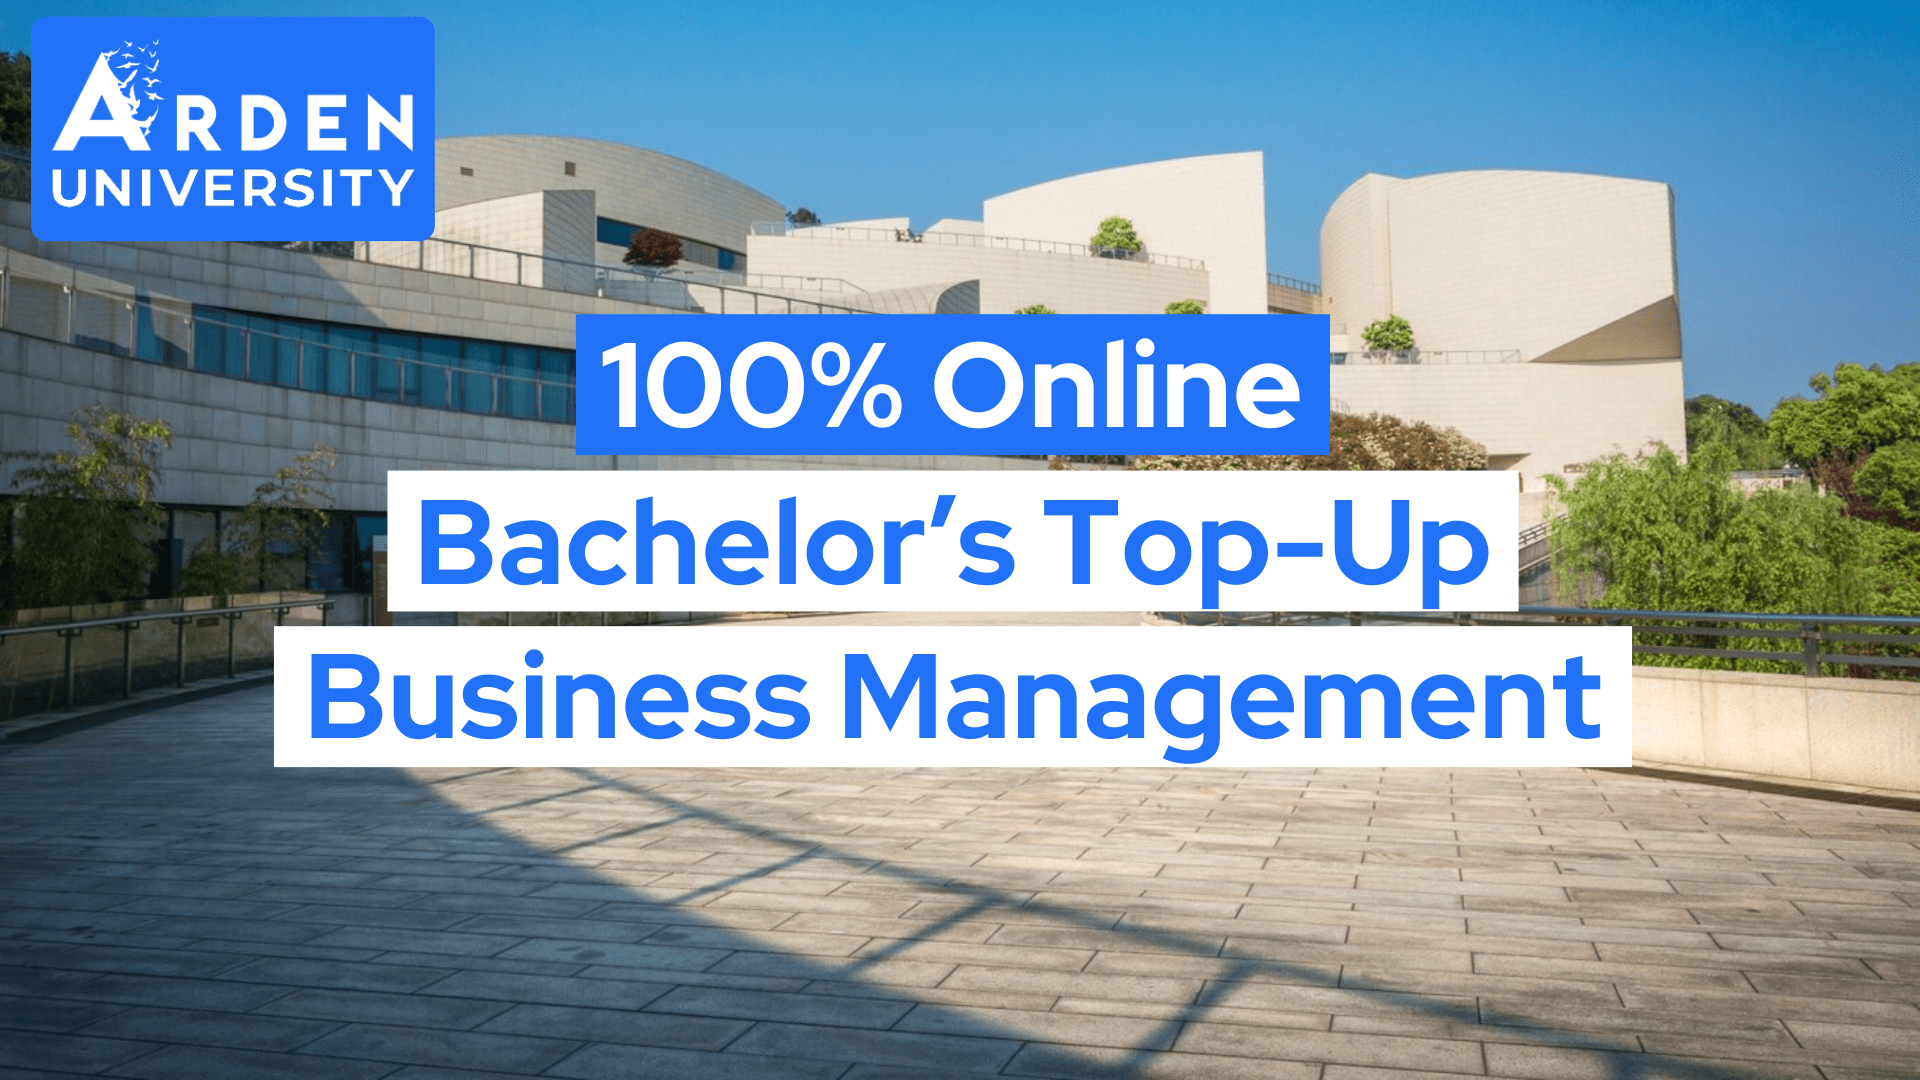 MQF Level 6 BA in Business Management course